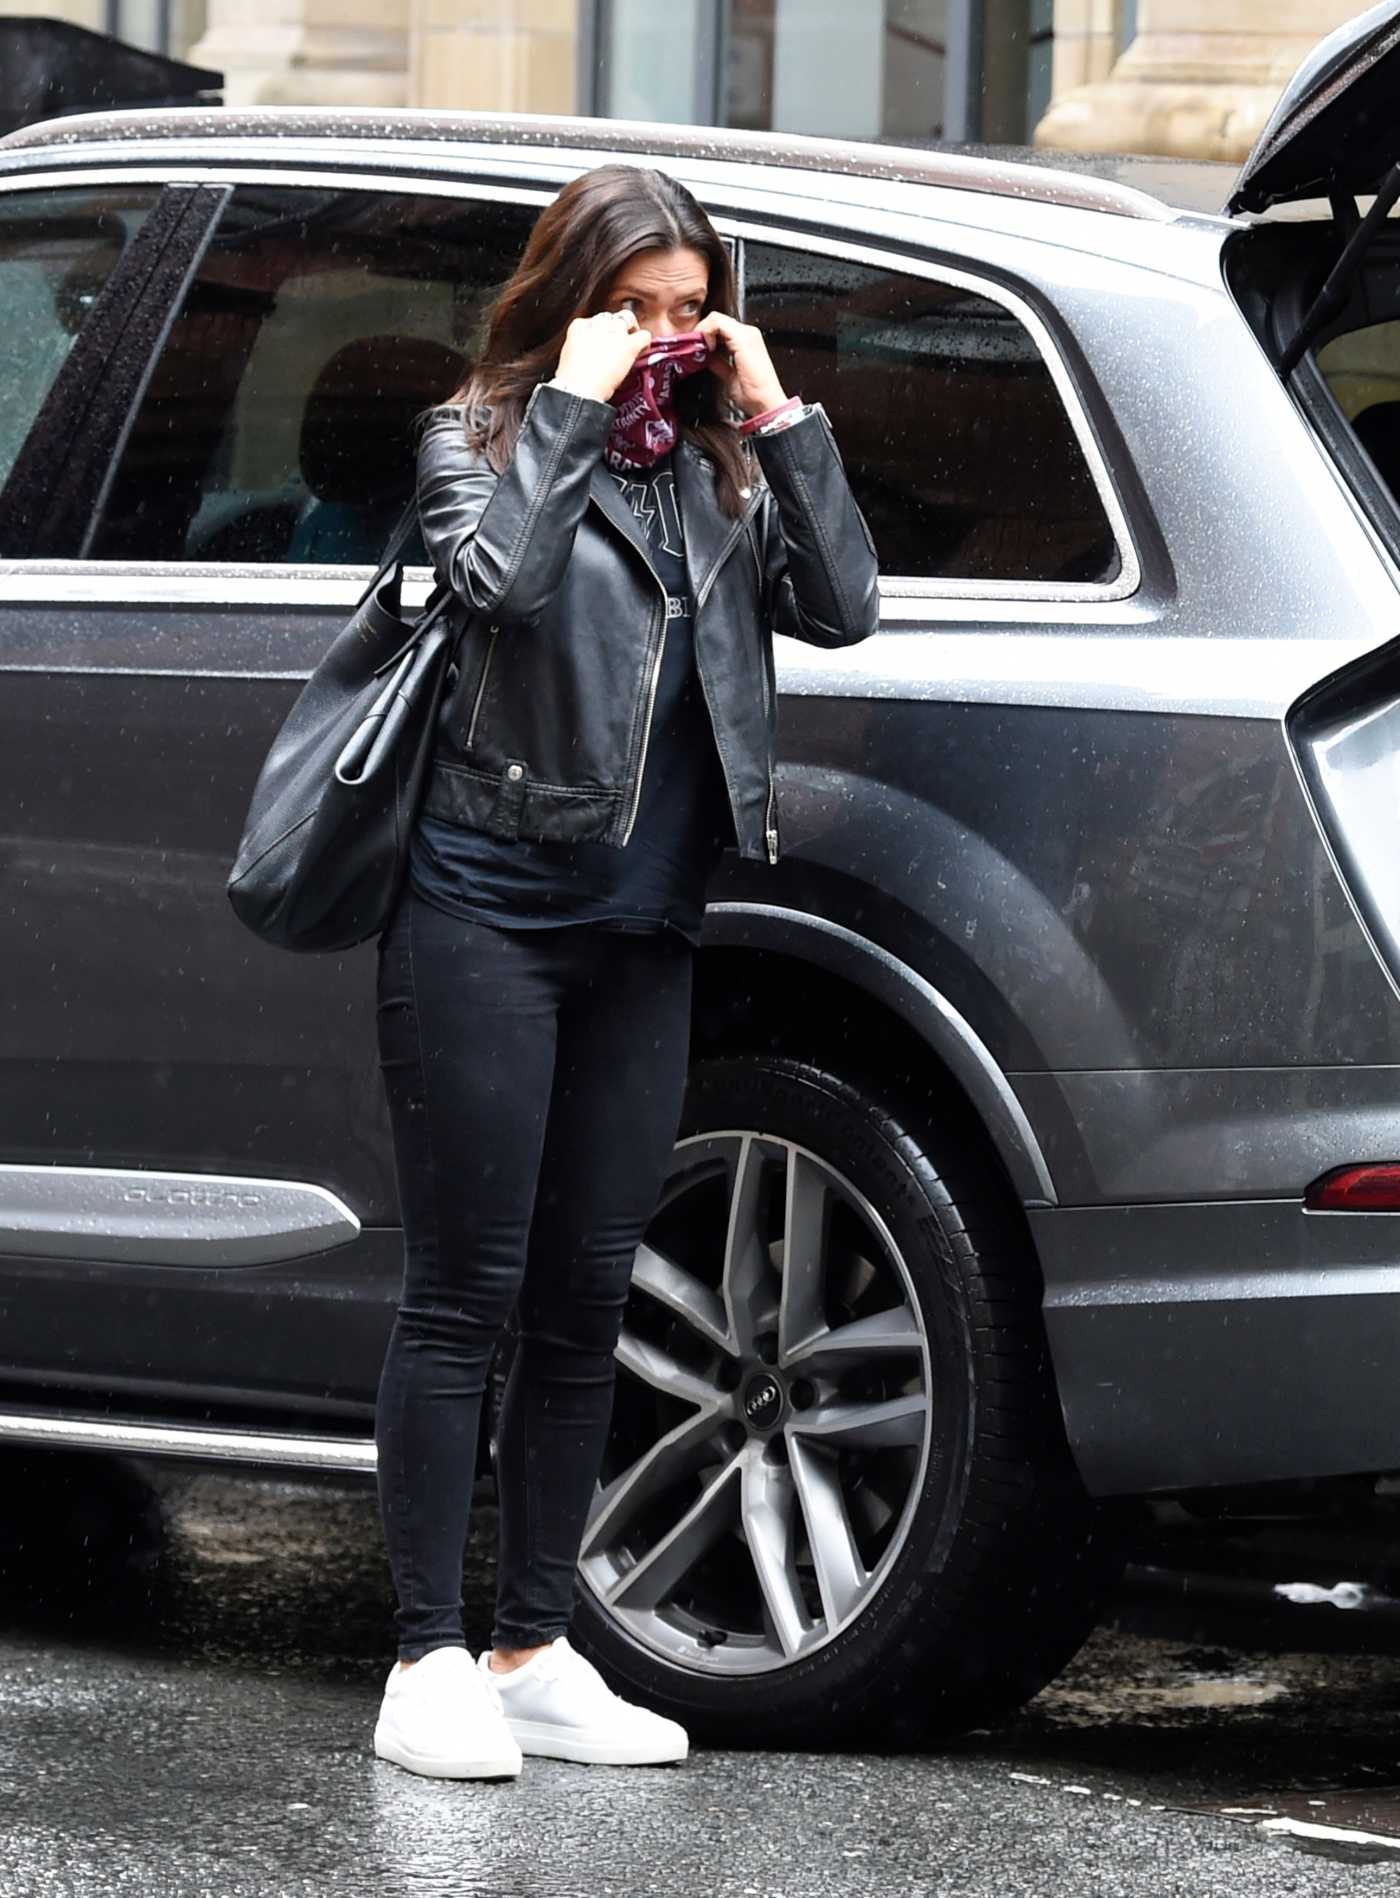 Kym Marsh in a Black Leather Jacket Arrives at the House of Evelyn Hair and Beauty Out with Her New Boyfriend in Manchester 07/18/2020